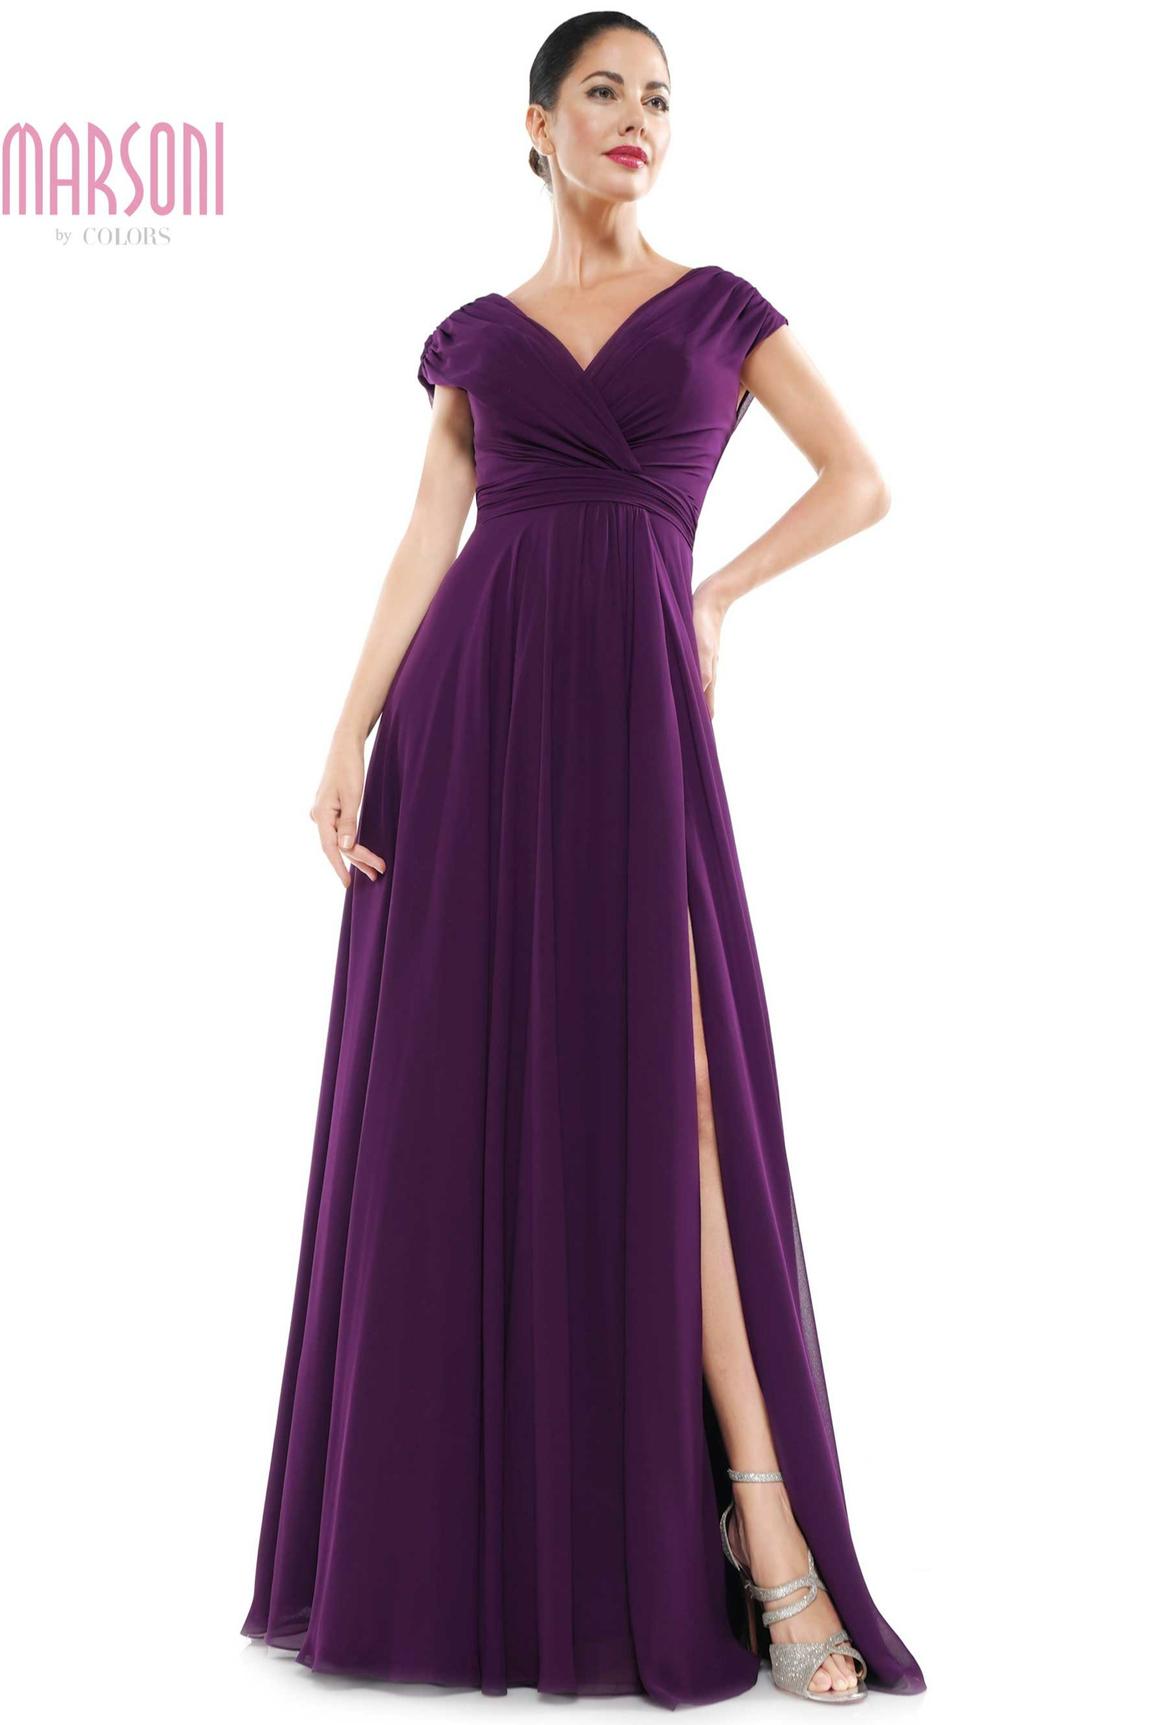 Style M251 Marsoni by Colors Size 12 Off The Shoulder Purple Side Slit Dress on Queenly